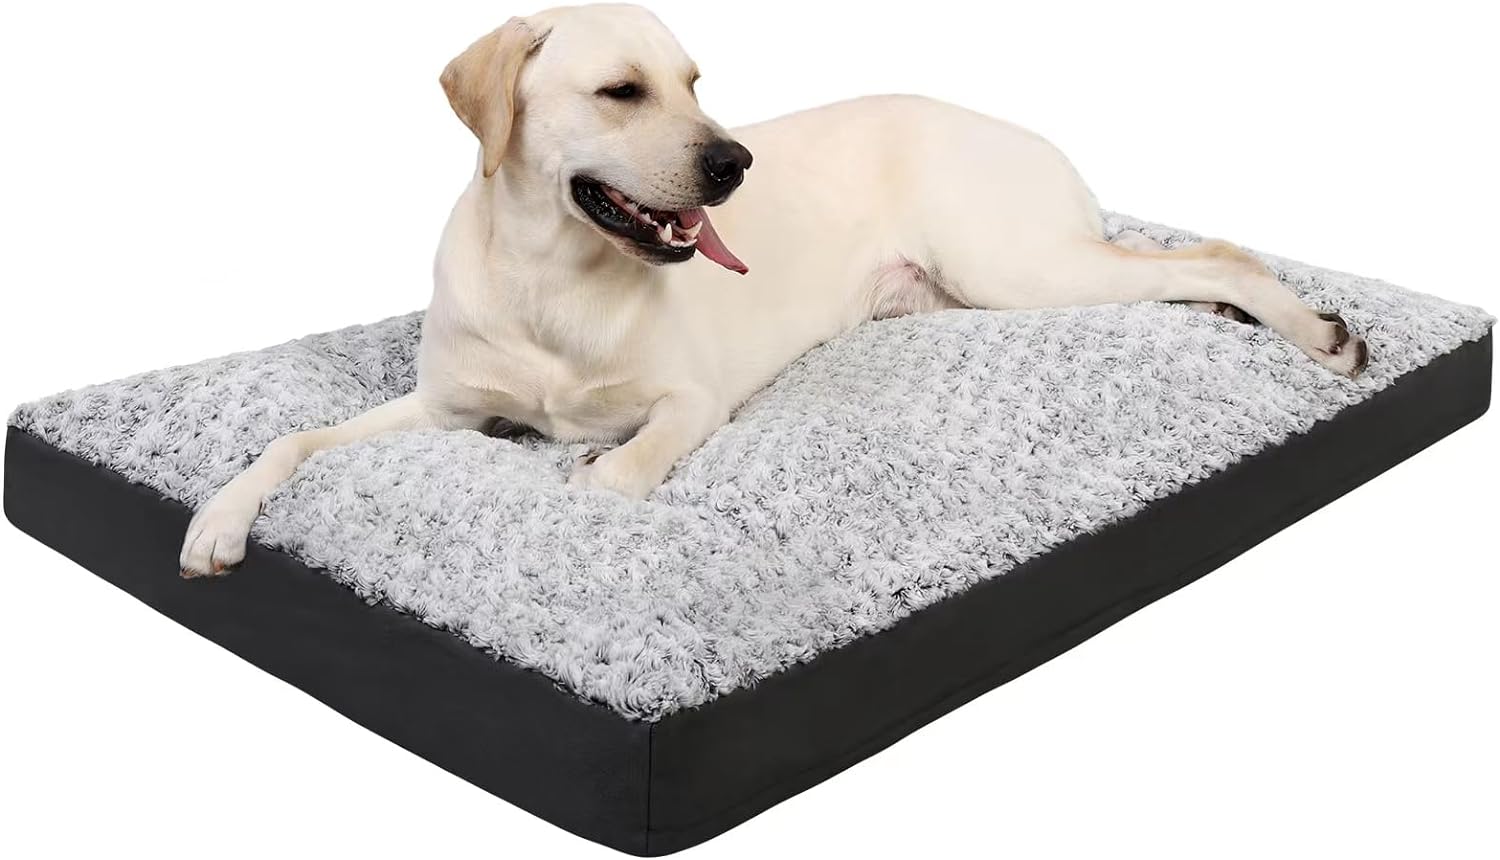 IHINIRE Washable Dog Crate Bed Deluxe Plush Dog Beds Reversible All-Seasons Bed Pet Sleeping Mattress for Large, Medium Dogs